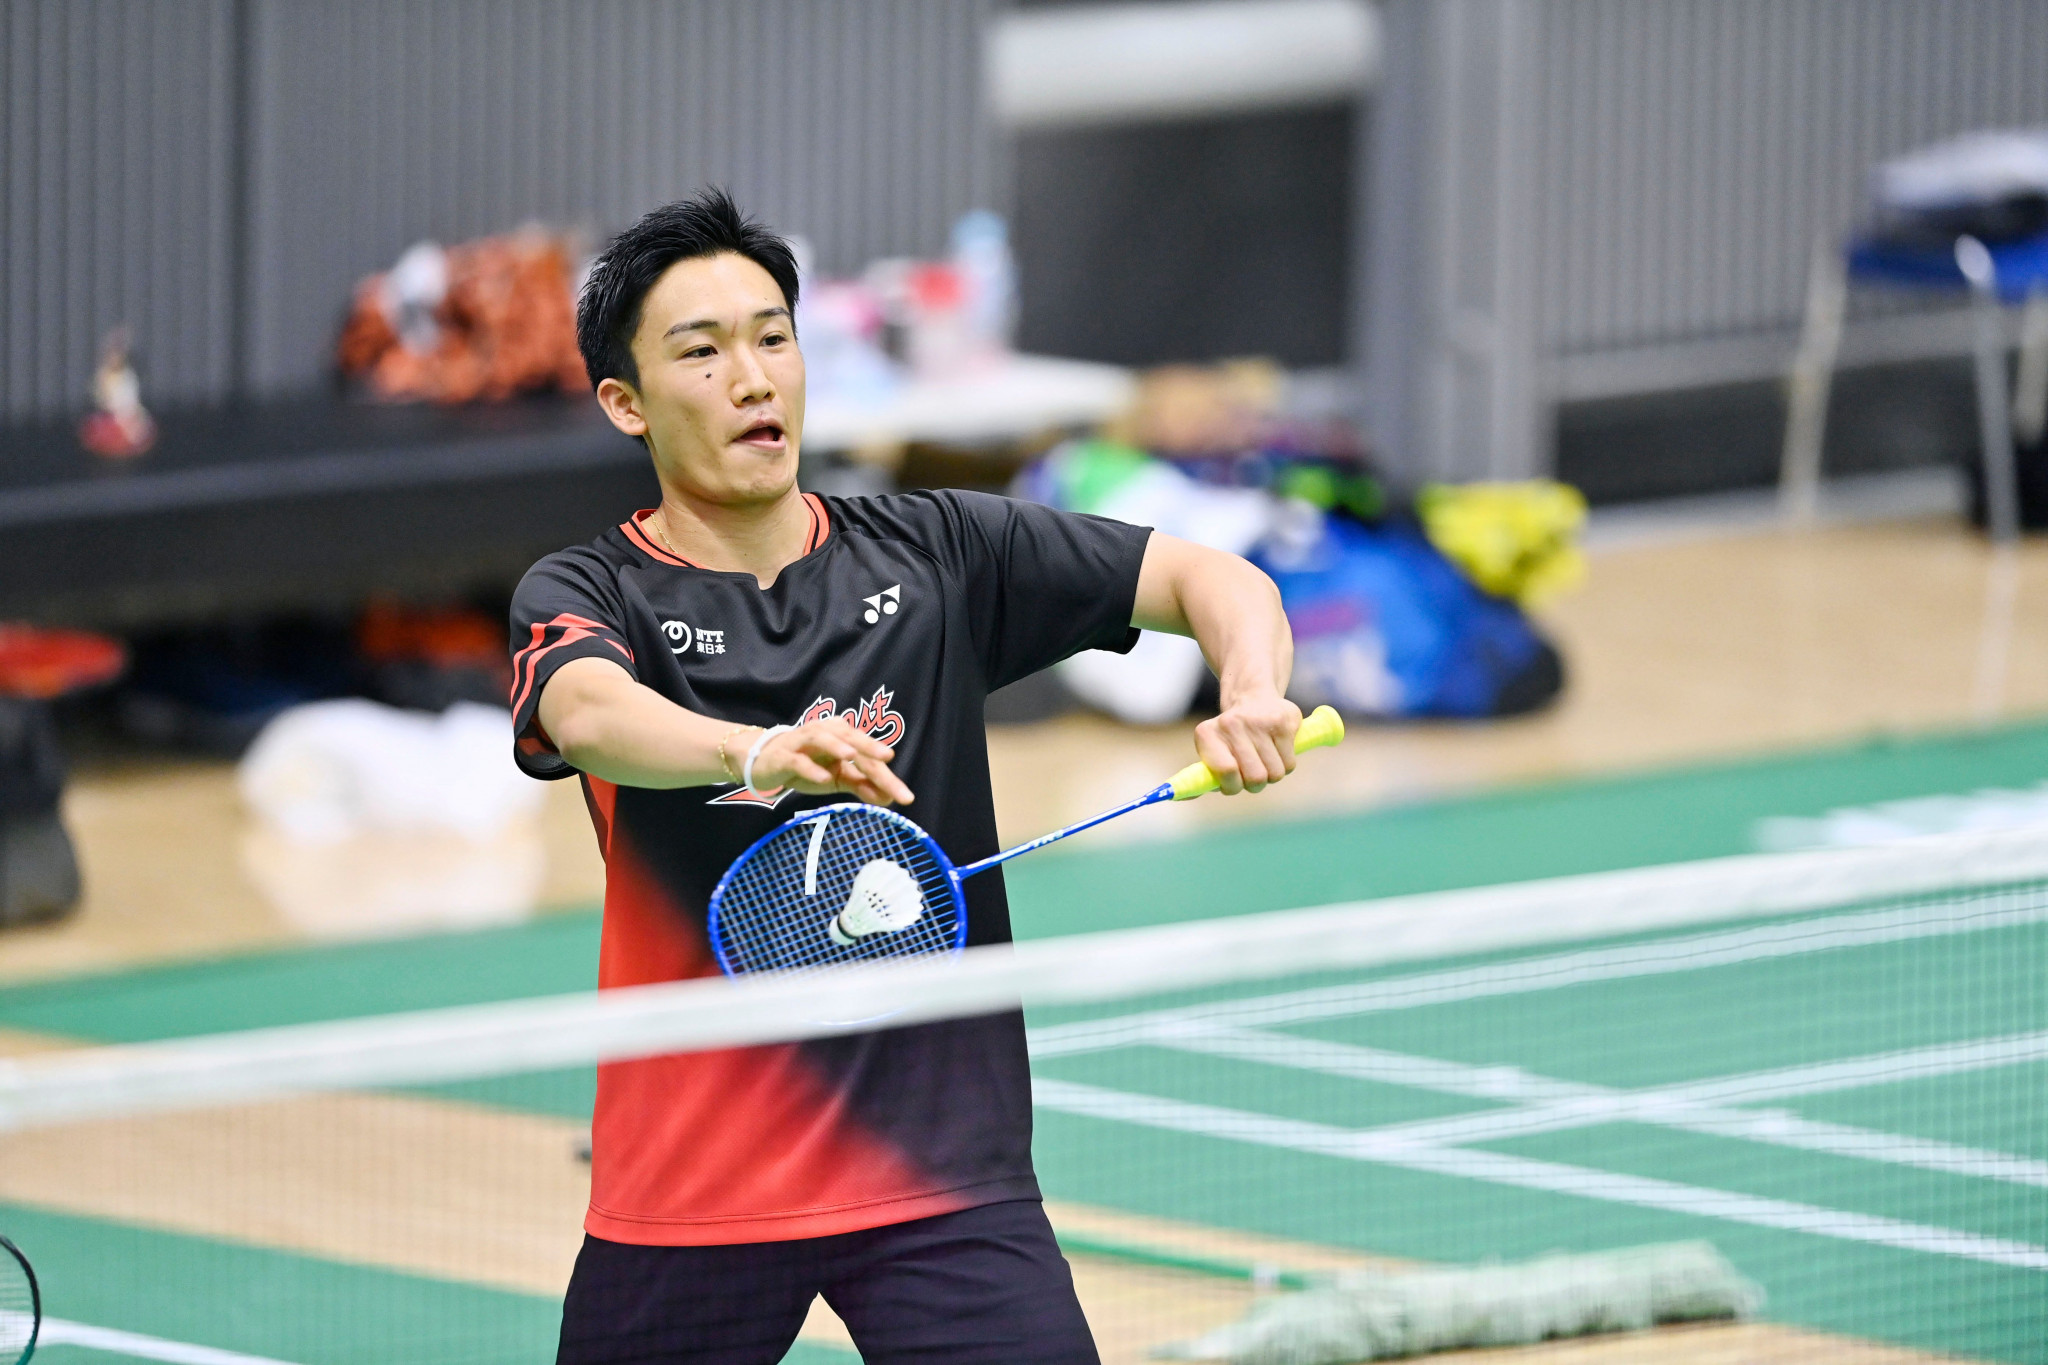 Japanese badminton star Kento Momota revealed he is aiming for Olympic gold at the postponed Tokyo 2020 Games ©Getty Images